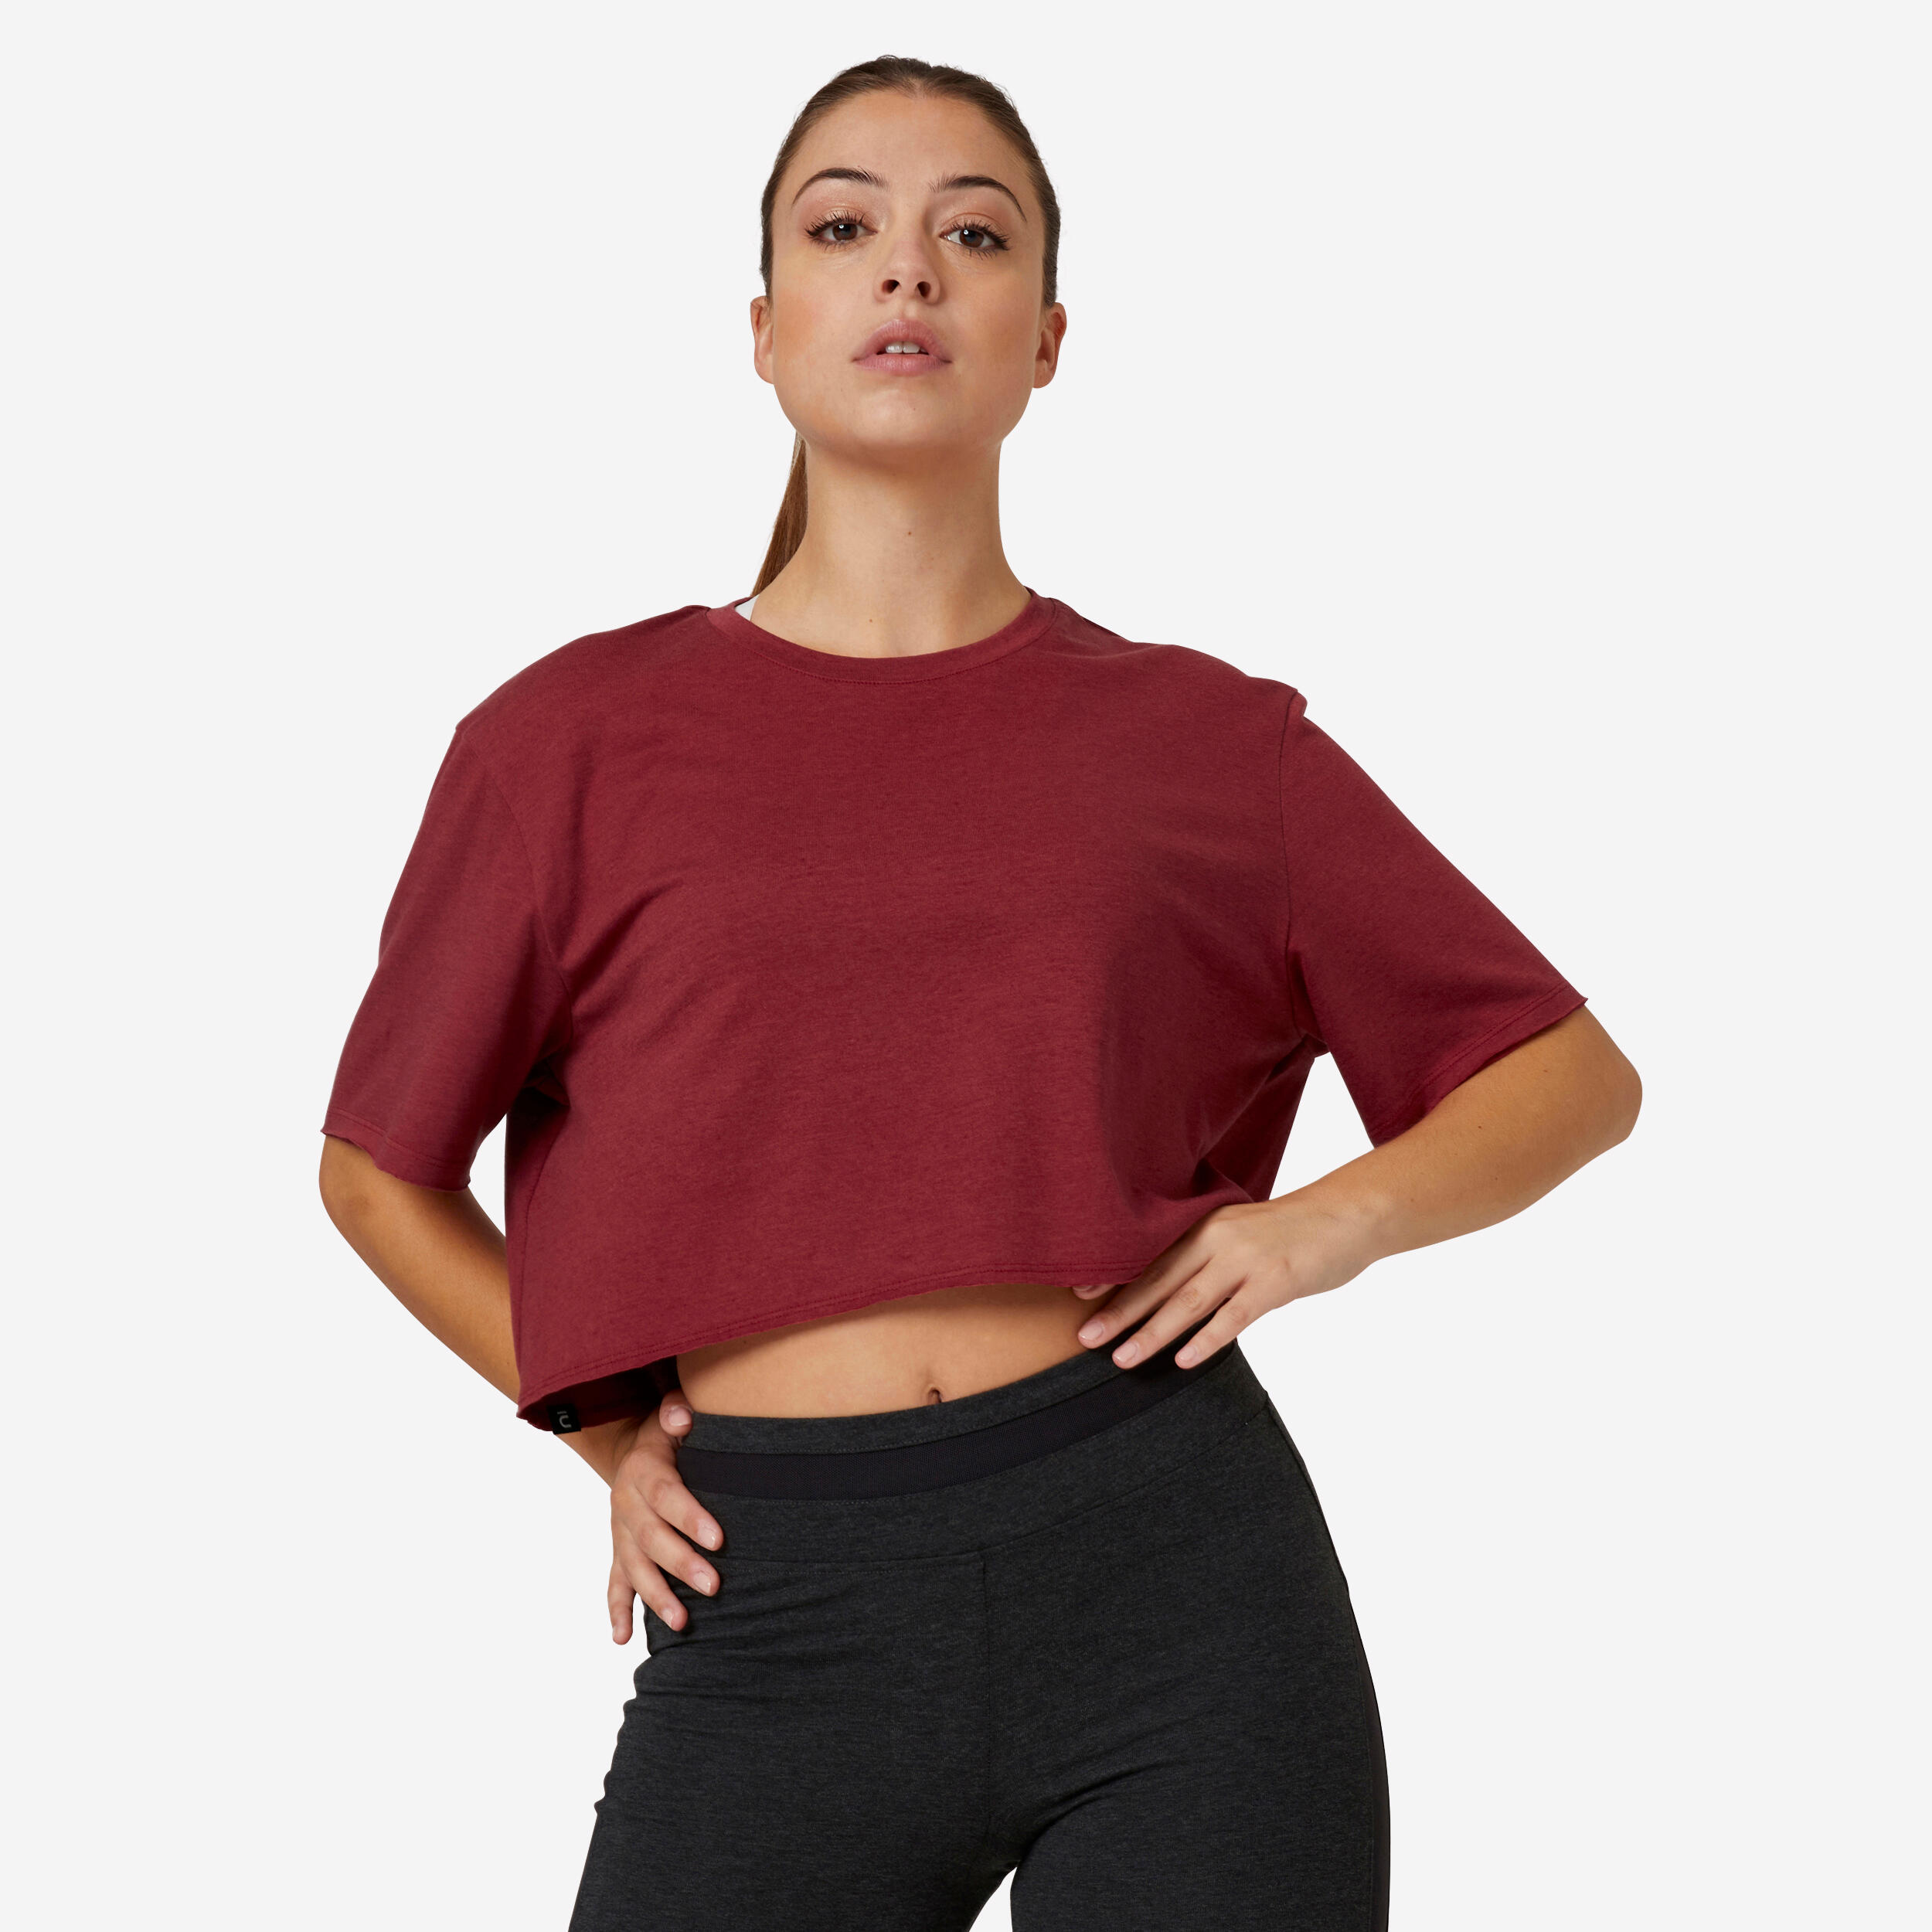 DOMYOS Women's Cropped Fitness T-Shirt 520 - Beetroot Red